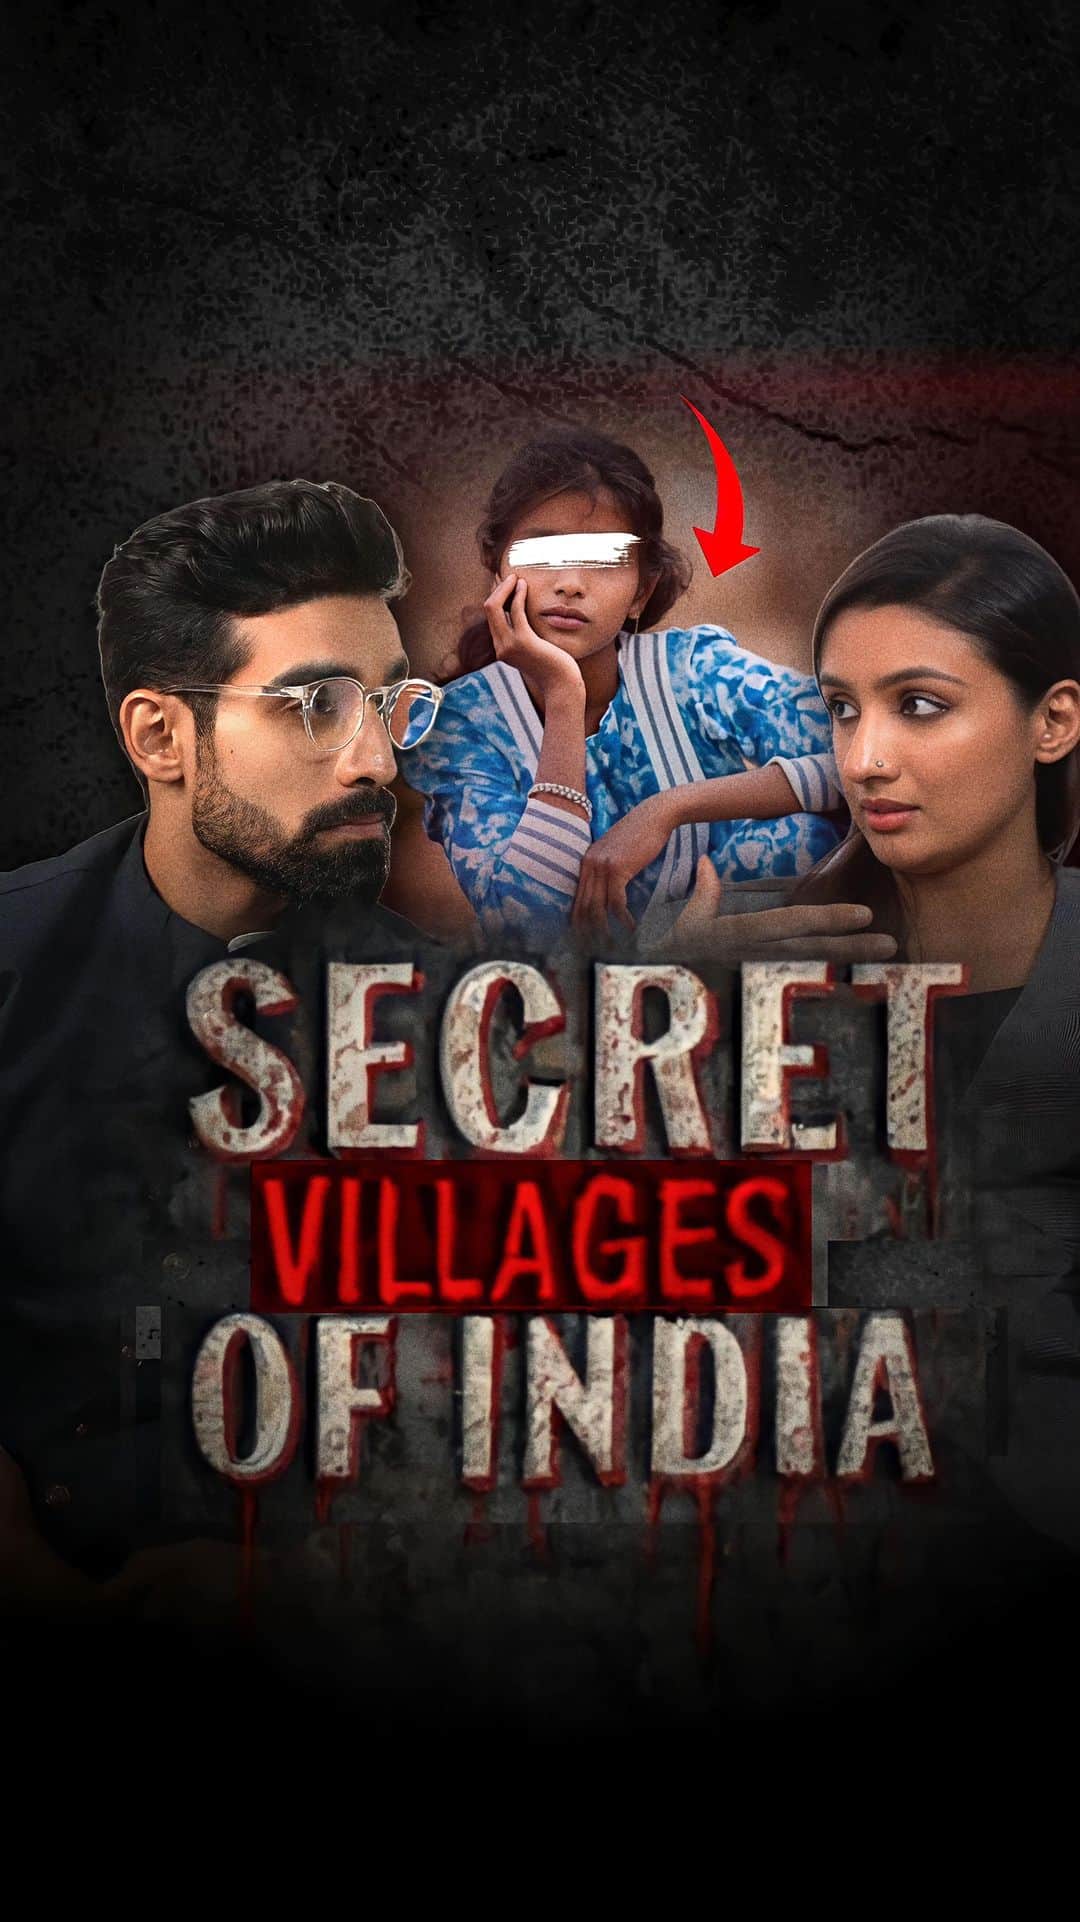 Karron S Dhinggraのインスタグラム：「Secret Villages Of India🗺️  In many states of India, women of some villages or in a way the whole village till today work as prostitutes not under any force. But with their OWN WILL!  Even their family members support this. The reason behind doing such work is due to their caste and also their husbands/ male members do not get any work to feed their family. Unfortunately, women have to do this work and by doing this work they can support their family. Now it has become a kind of a  traditional which have been following in these villages to fulfill their family needs.  Director - Neerat Kaur @kaurNeerat & Akanksha Saxena @akanksha_saxena  Documentary- India’s prostitution villages | DW Documentary (Youtube)  . . #TheFormalEdit #Education」